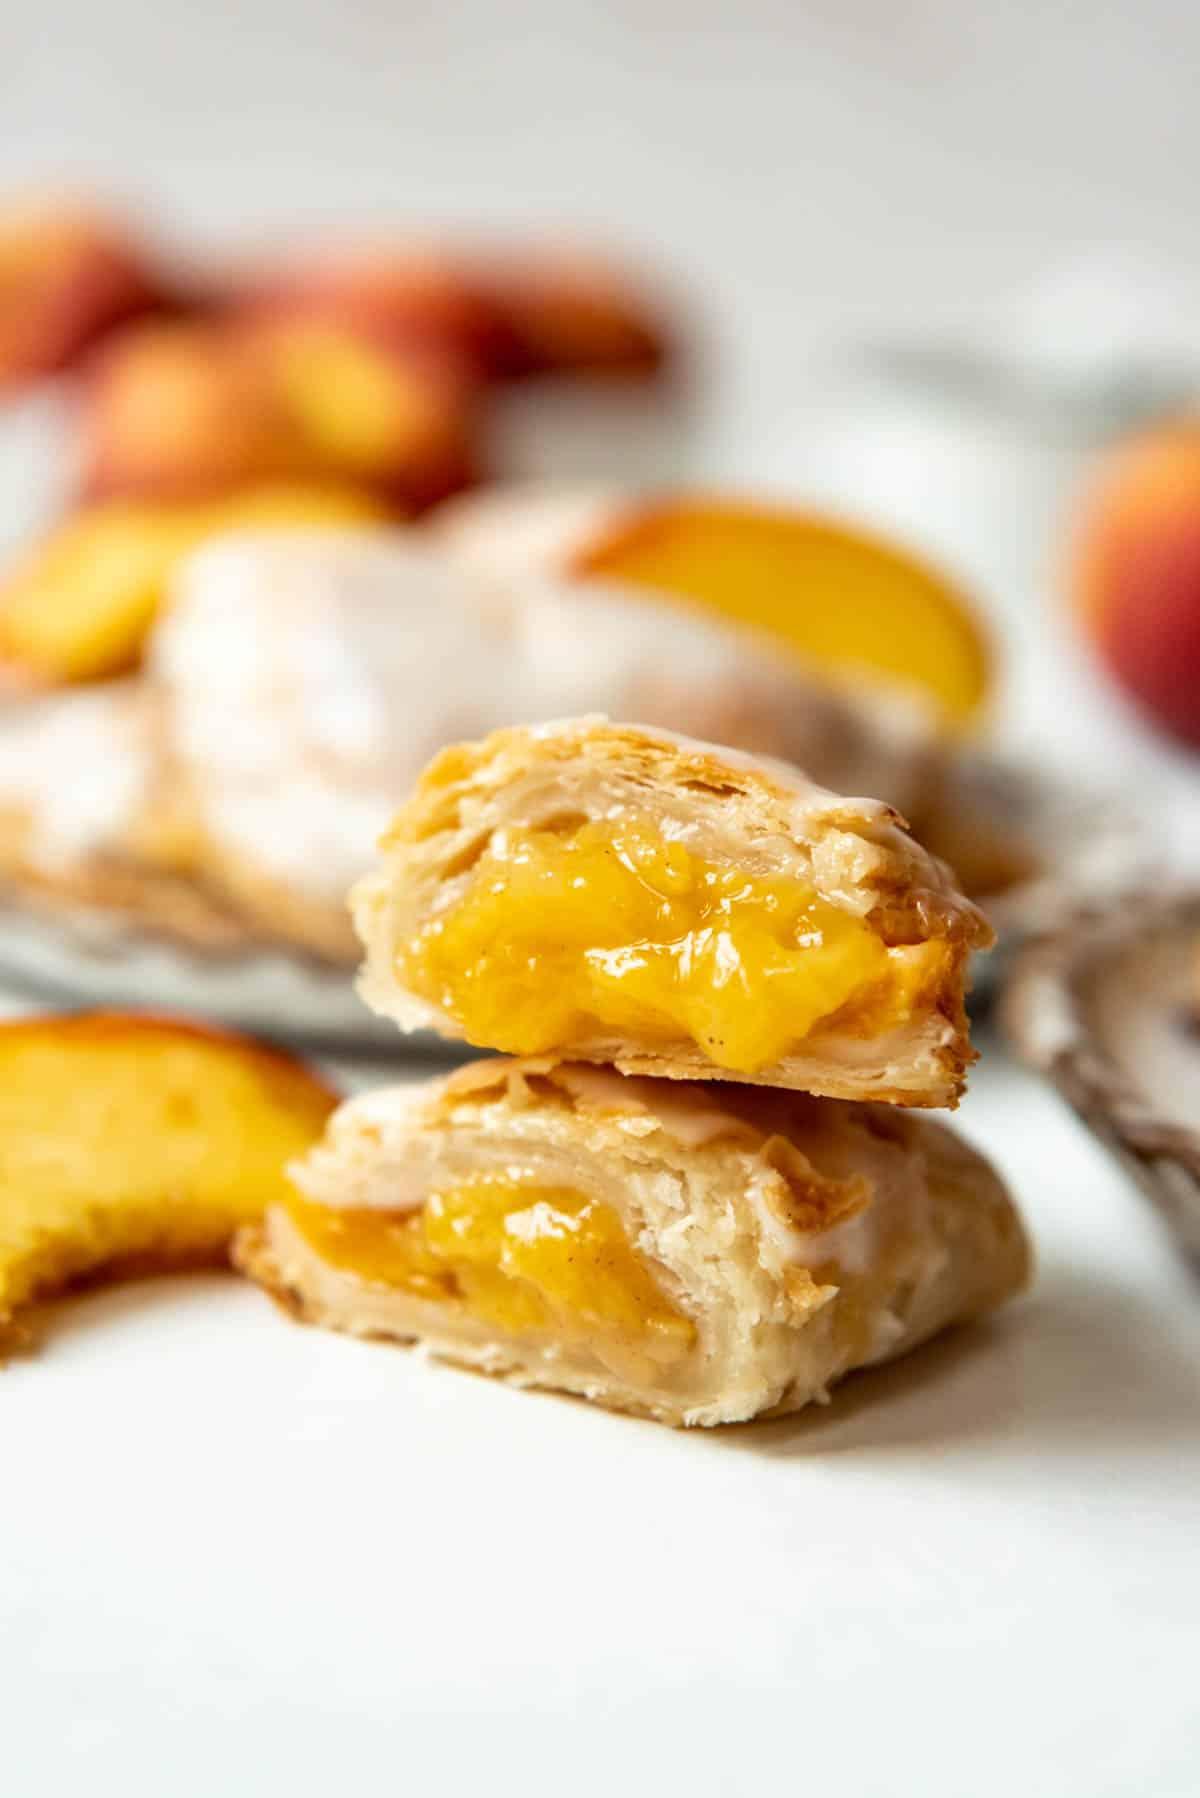 A peach hand pie that has been cut in half with the halves stacked on top of each other showing the peach filling inside.